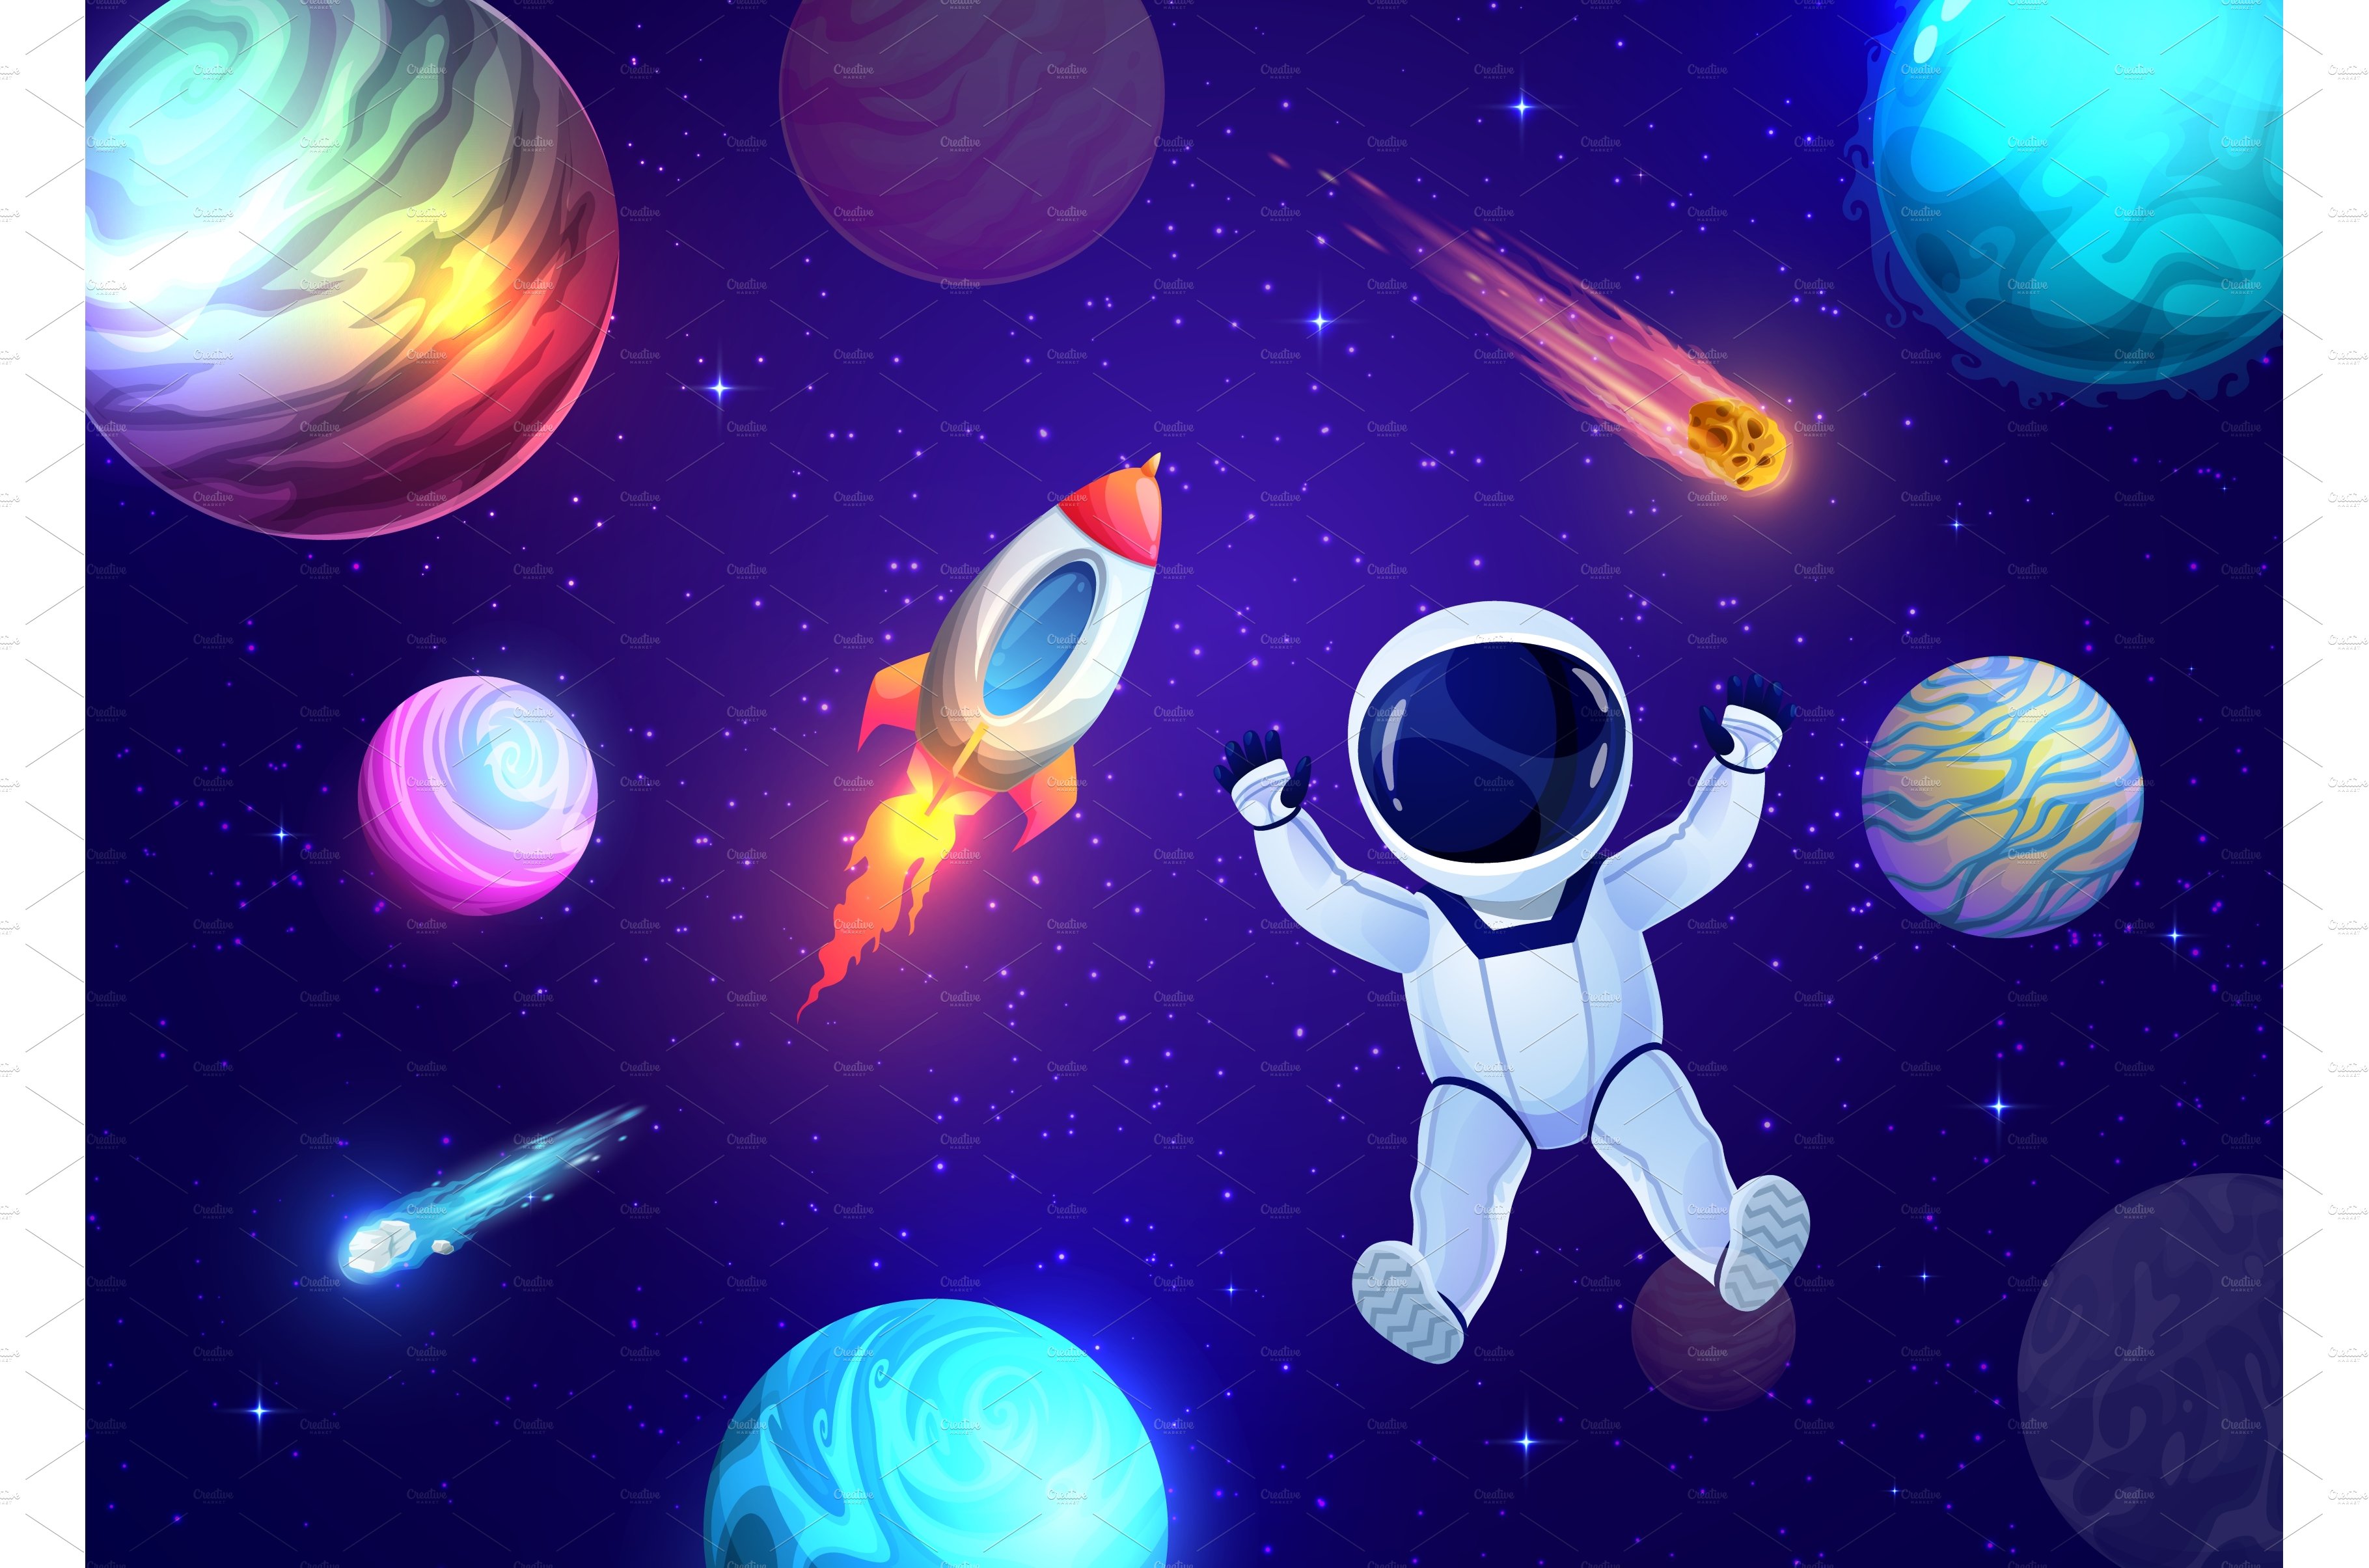 Cartoon astronaut in outer space cover image.